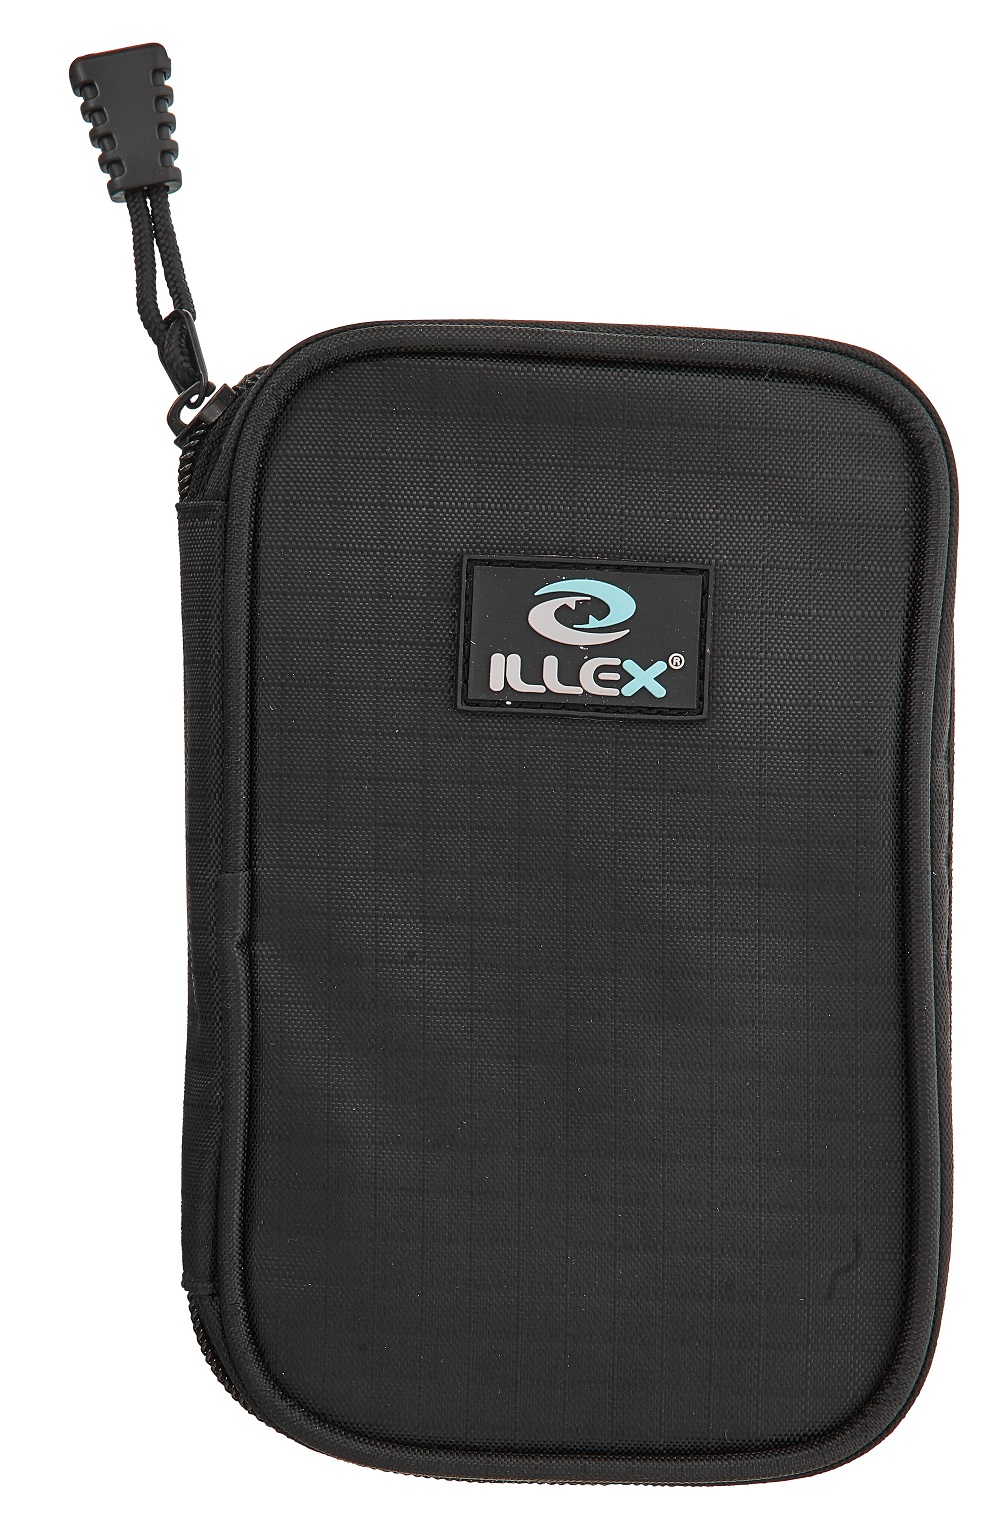 https://www.predatortackle.co.uk/Luggage/ILLEX/Illex-Lure-Street-Case/ILLEX%20LURE%20STREET%20CASE%20BLACK%2039411%20FROM%20PREADTOR%20TACKLE.jpg